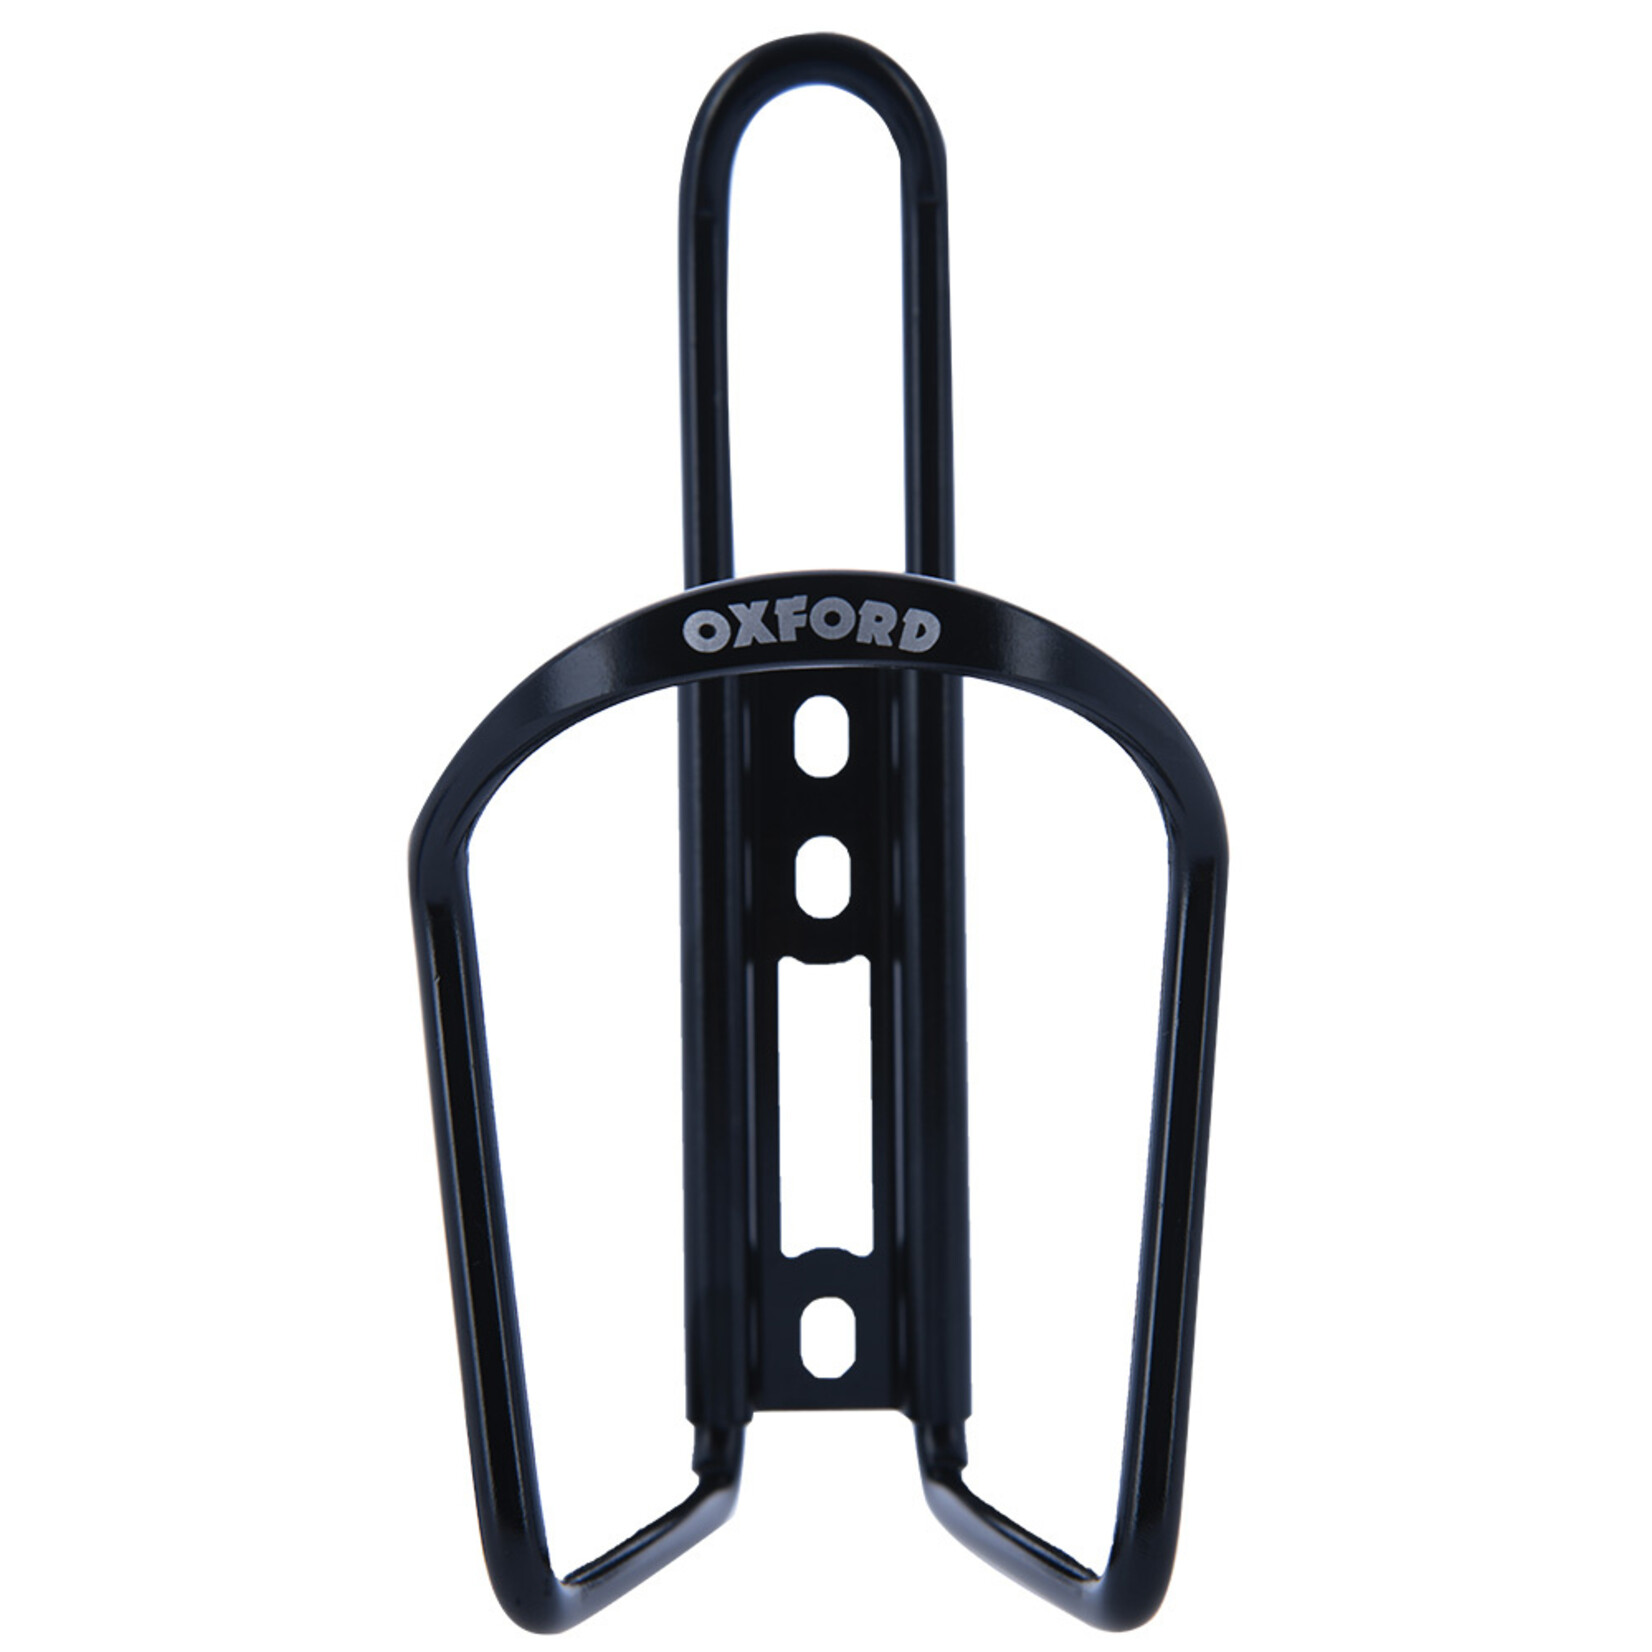 Oxford Oxford Bottle Cage with Bracket - Black